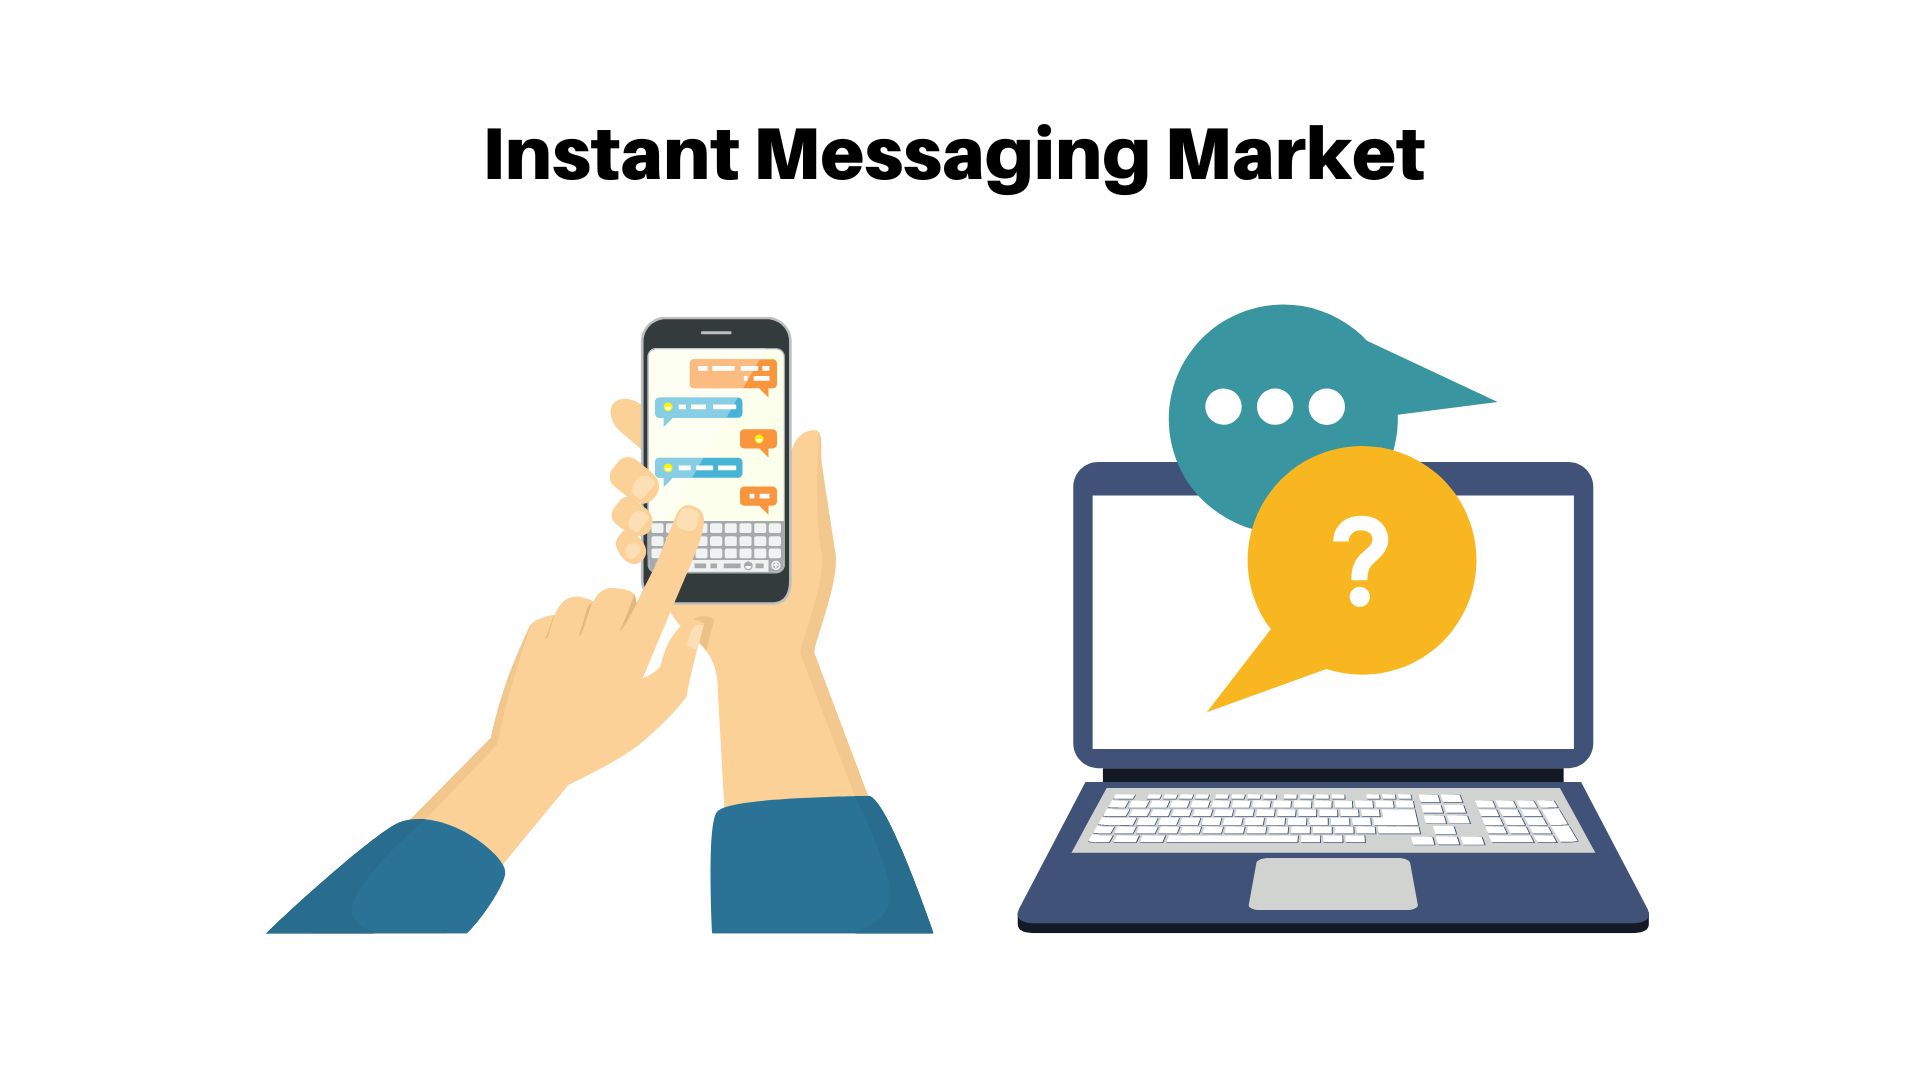 Instant Messaging Market raise at a CAGR of 10.6% & Surpass USD 89.5 Bn by 2032